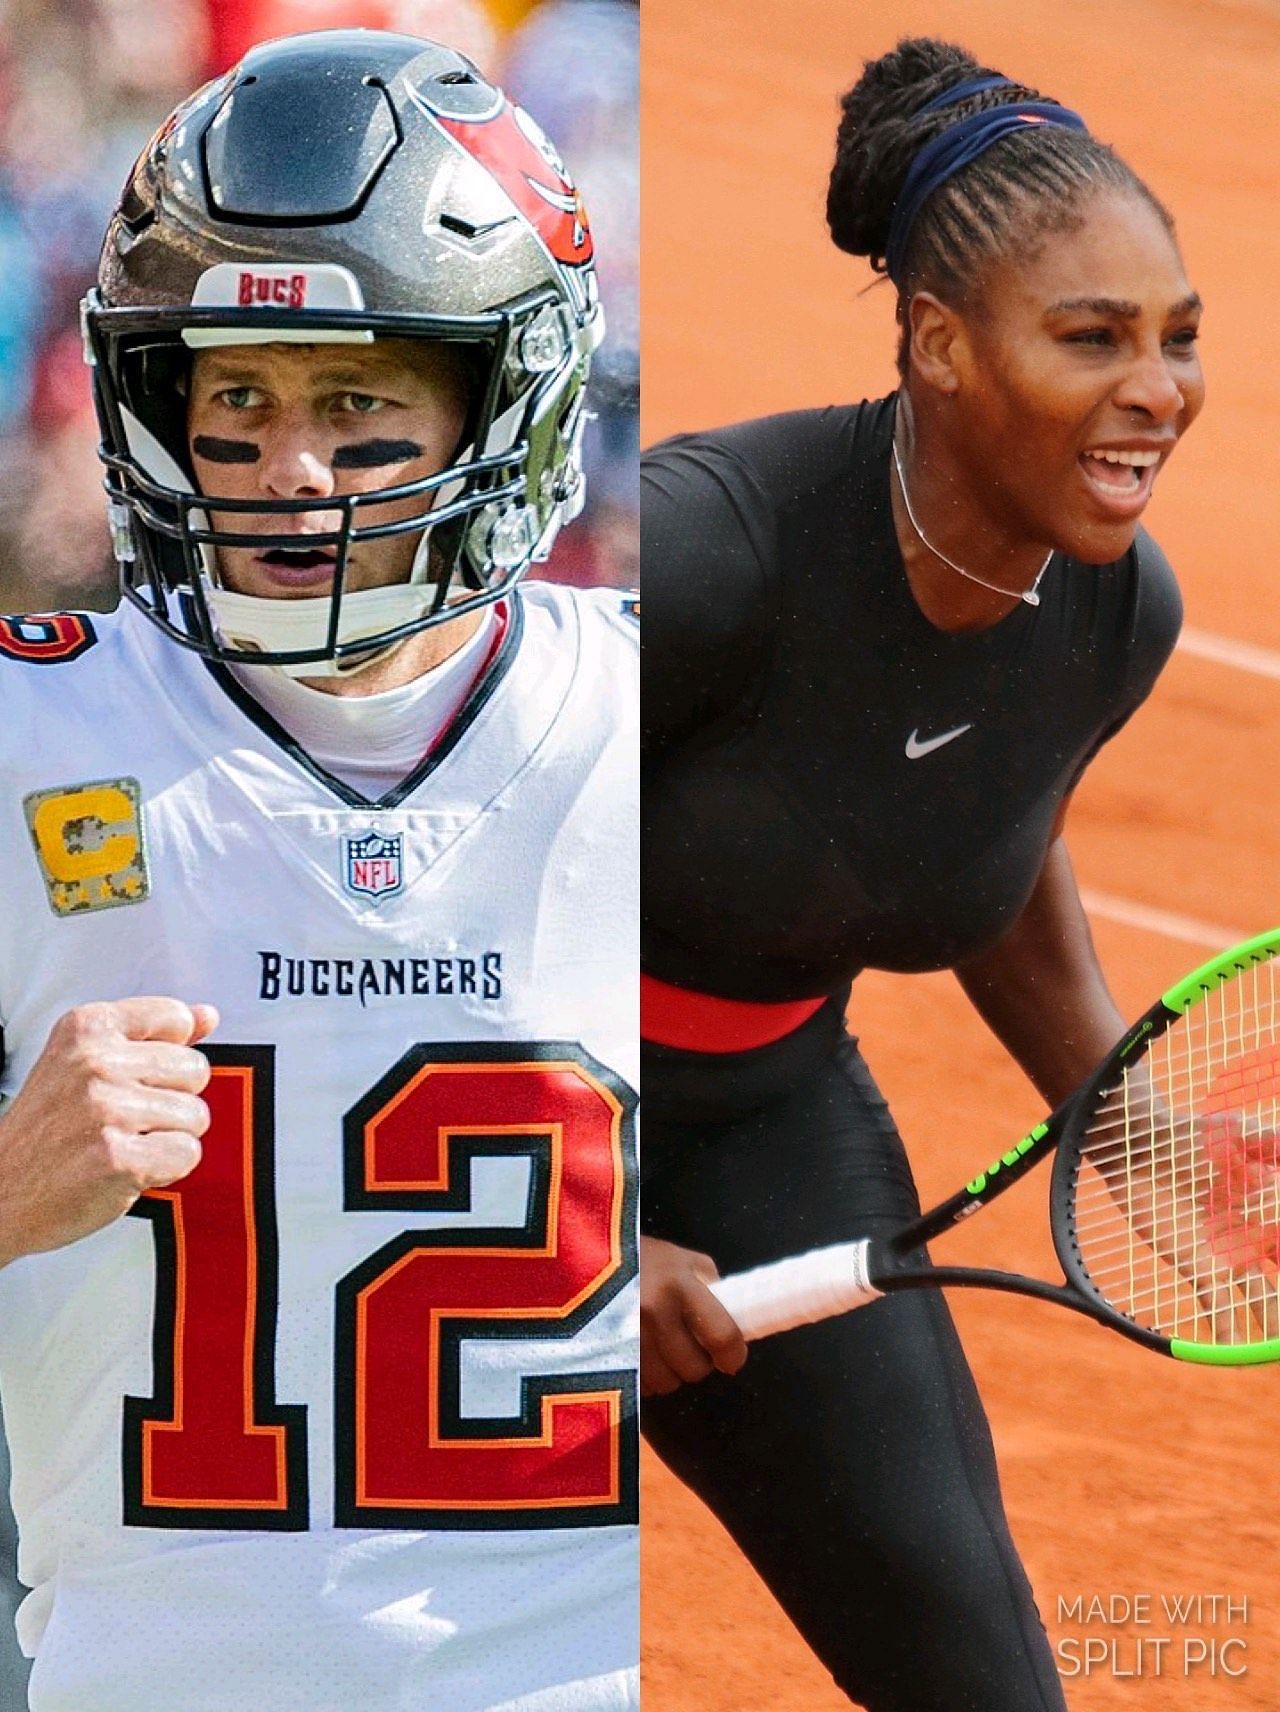 Serena Williams took a shot at Tom Brady in her farewell